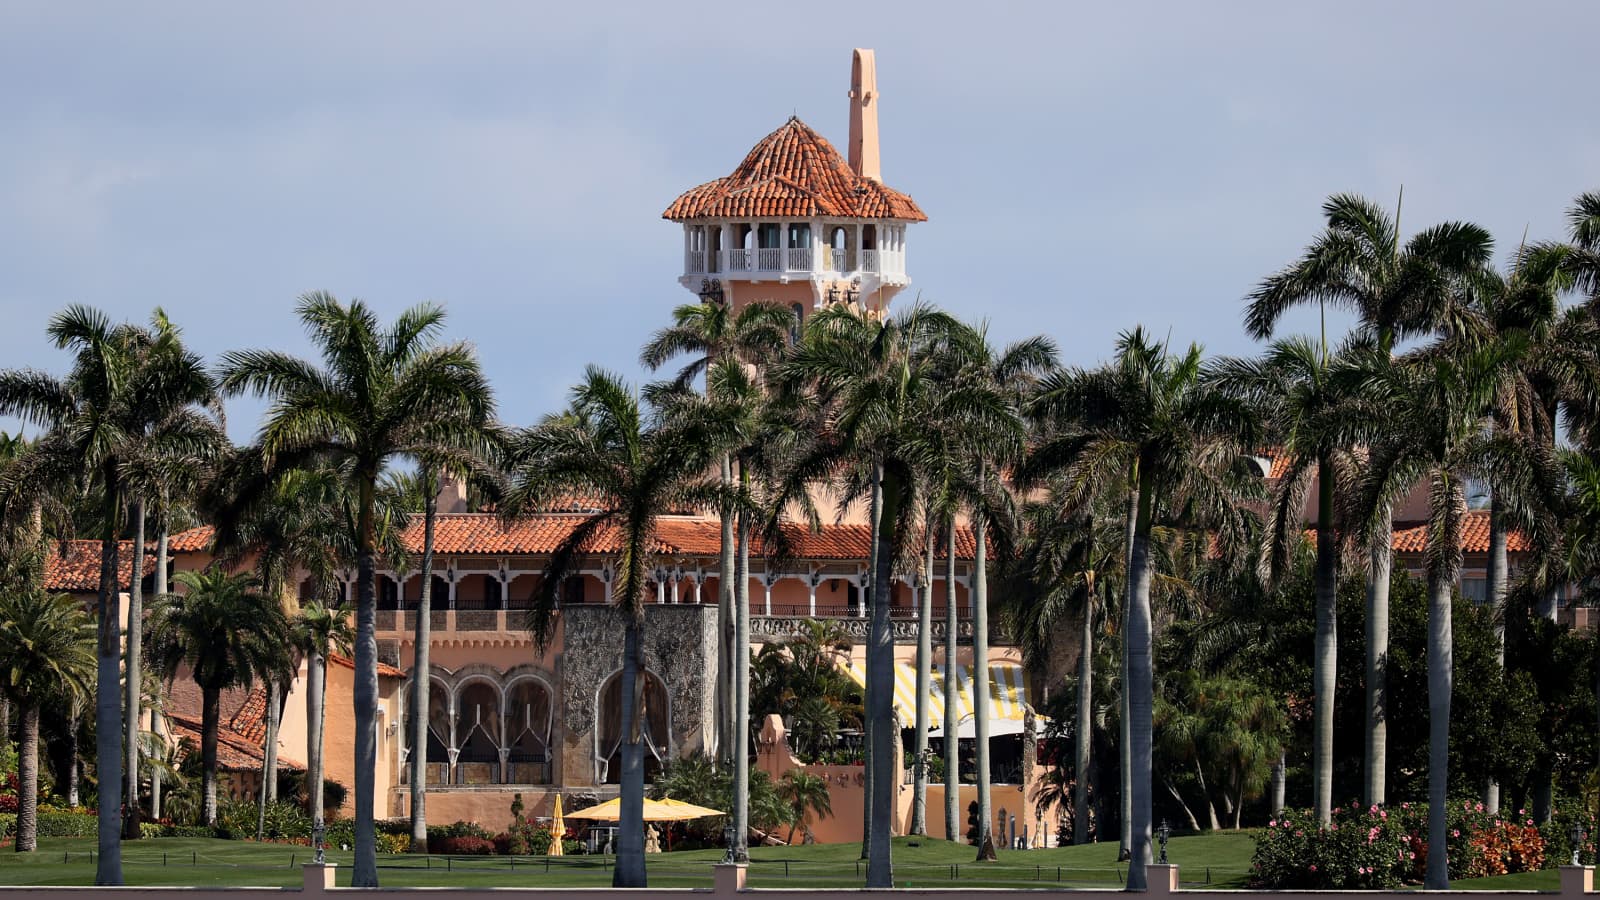 The FBI conducted an “unannounced raid and seized paper” at former US President Donald Trump’s Mar-a-Lago resort as part of the Department of Justice’s investigation into whether he took classified documents from the White House to his Florida home.